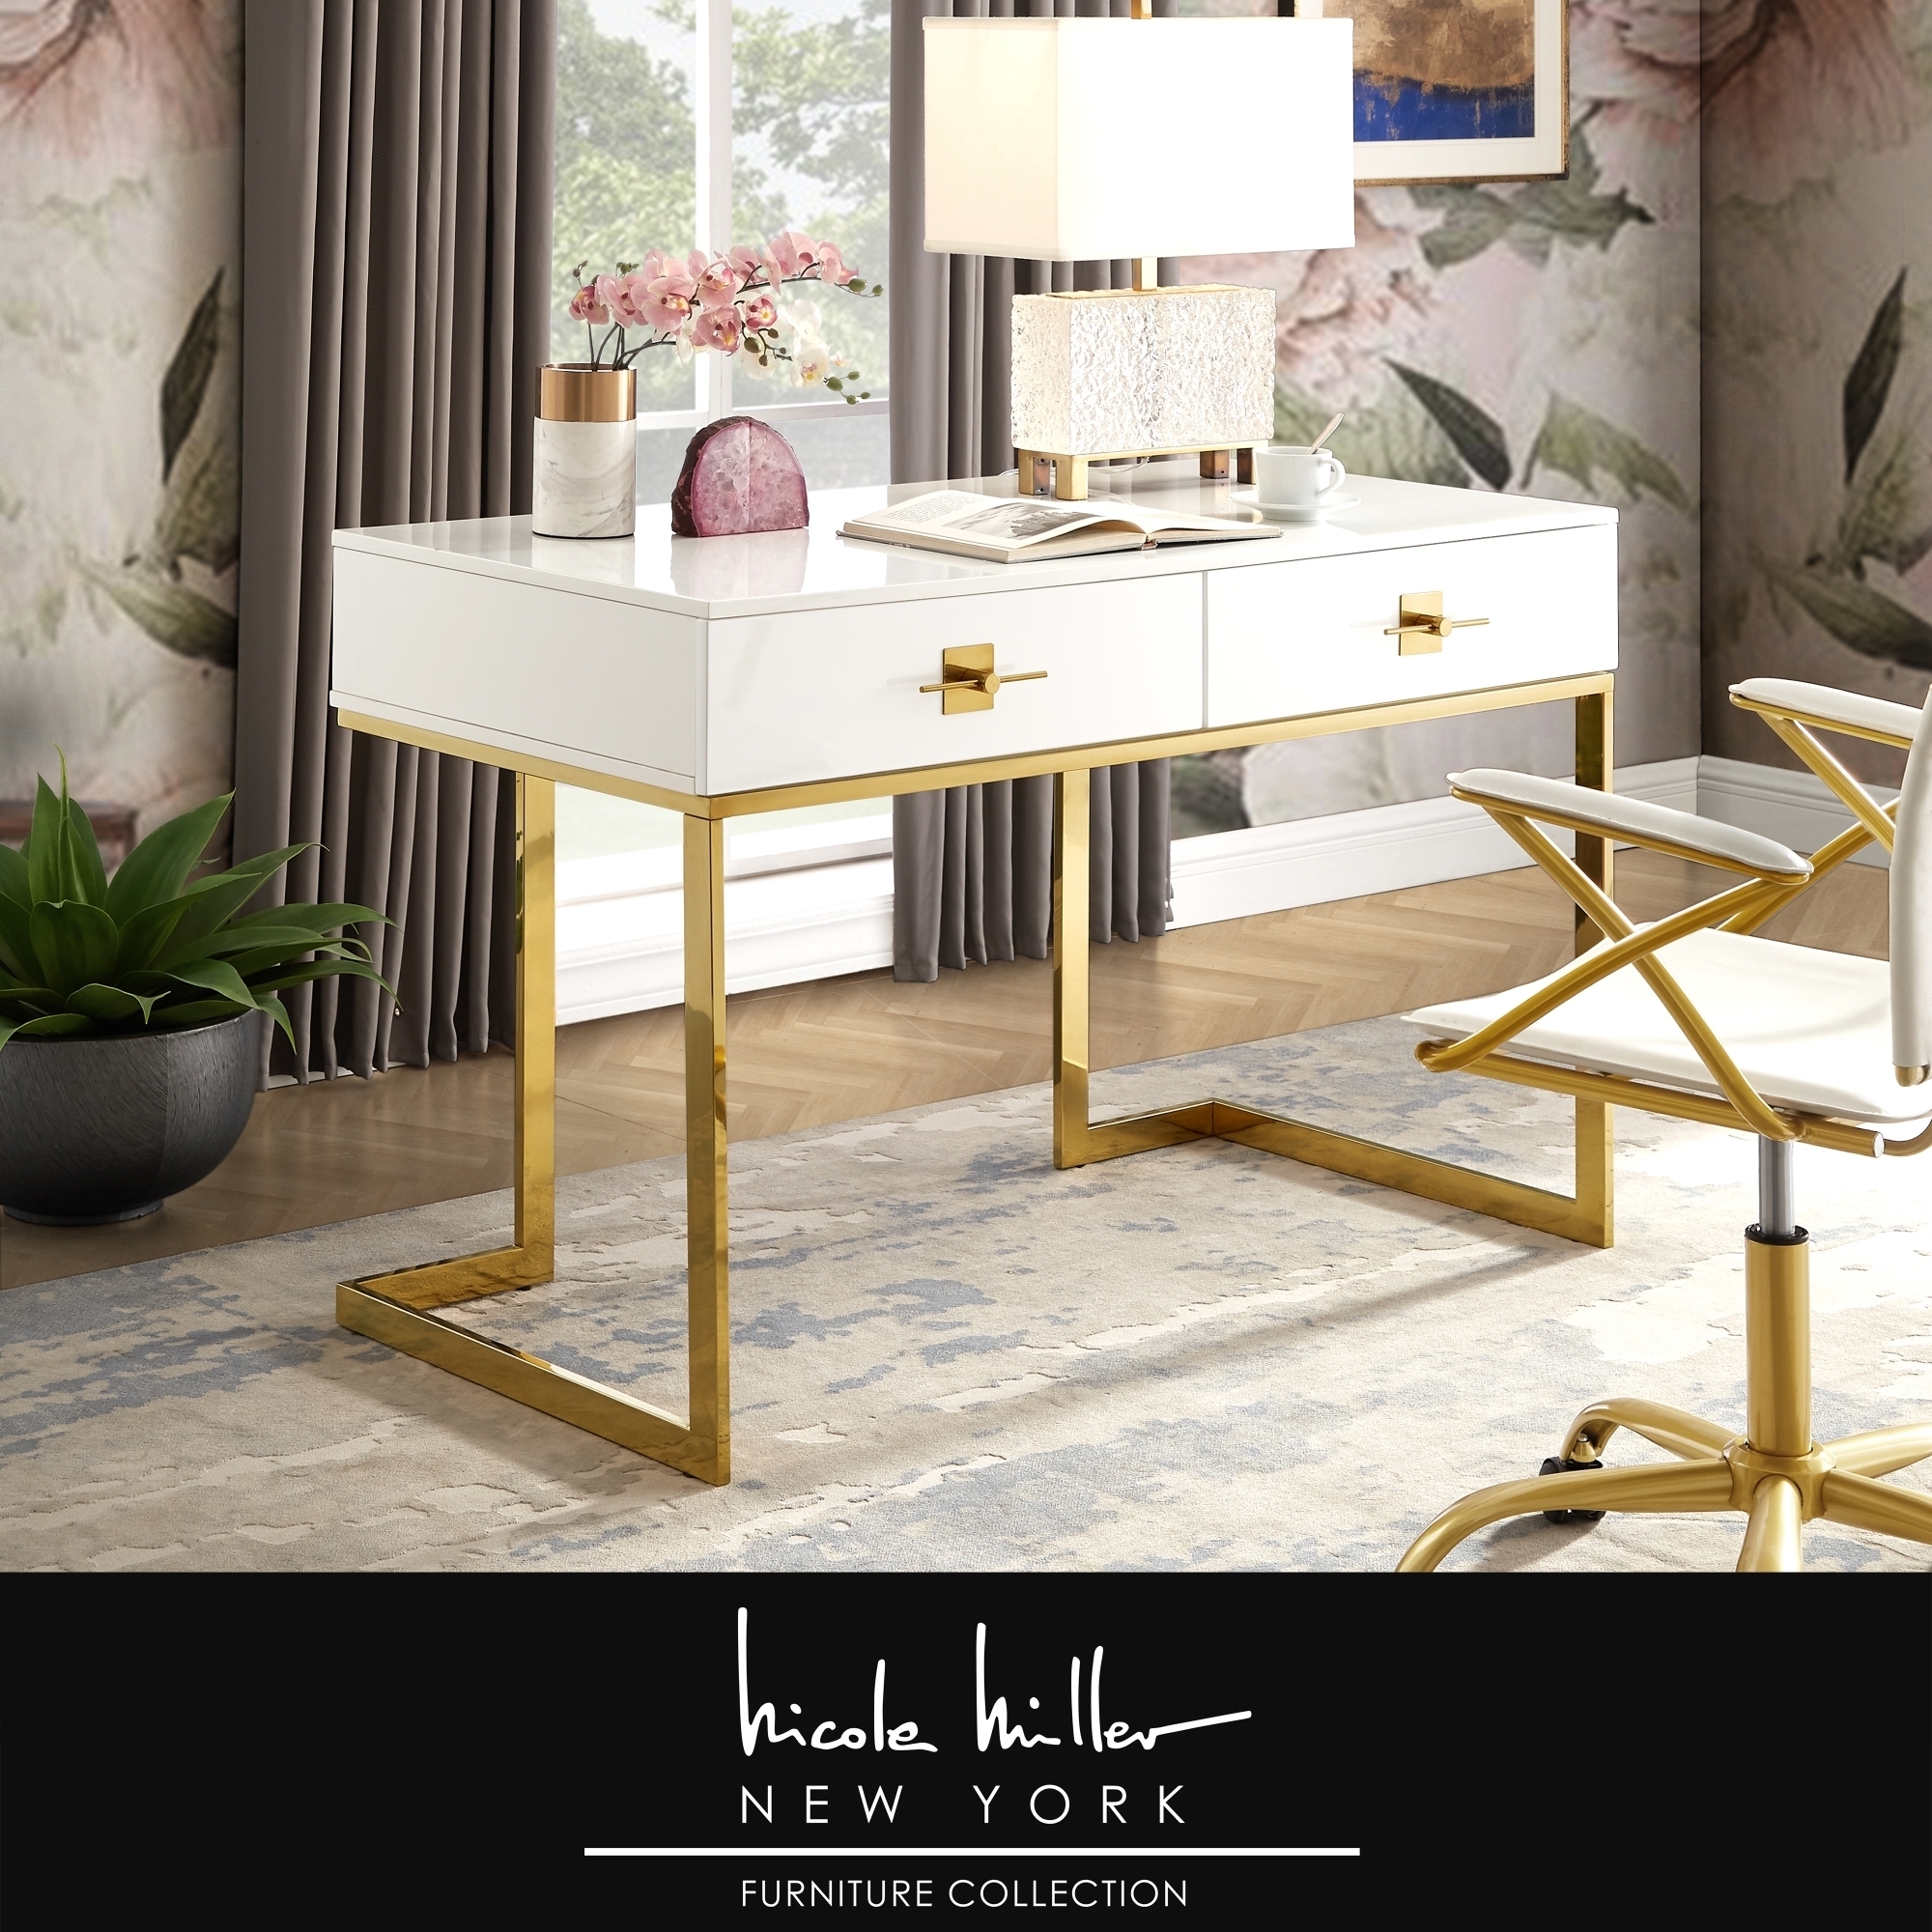 Moana Desk-2 Drawers-Hight Gloss Lacquer Finish-Polished Stainless Steel Base - White/gold